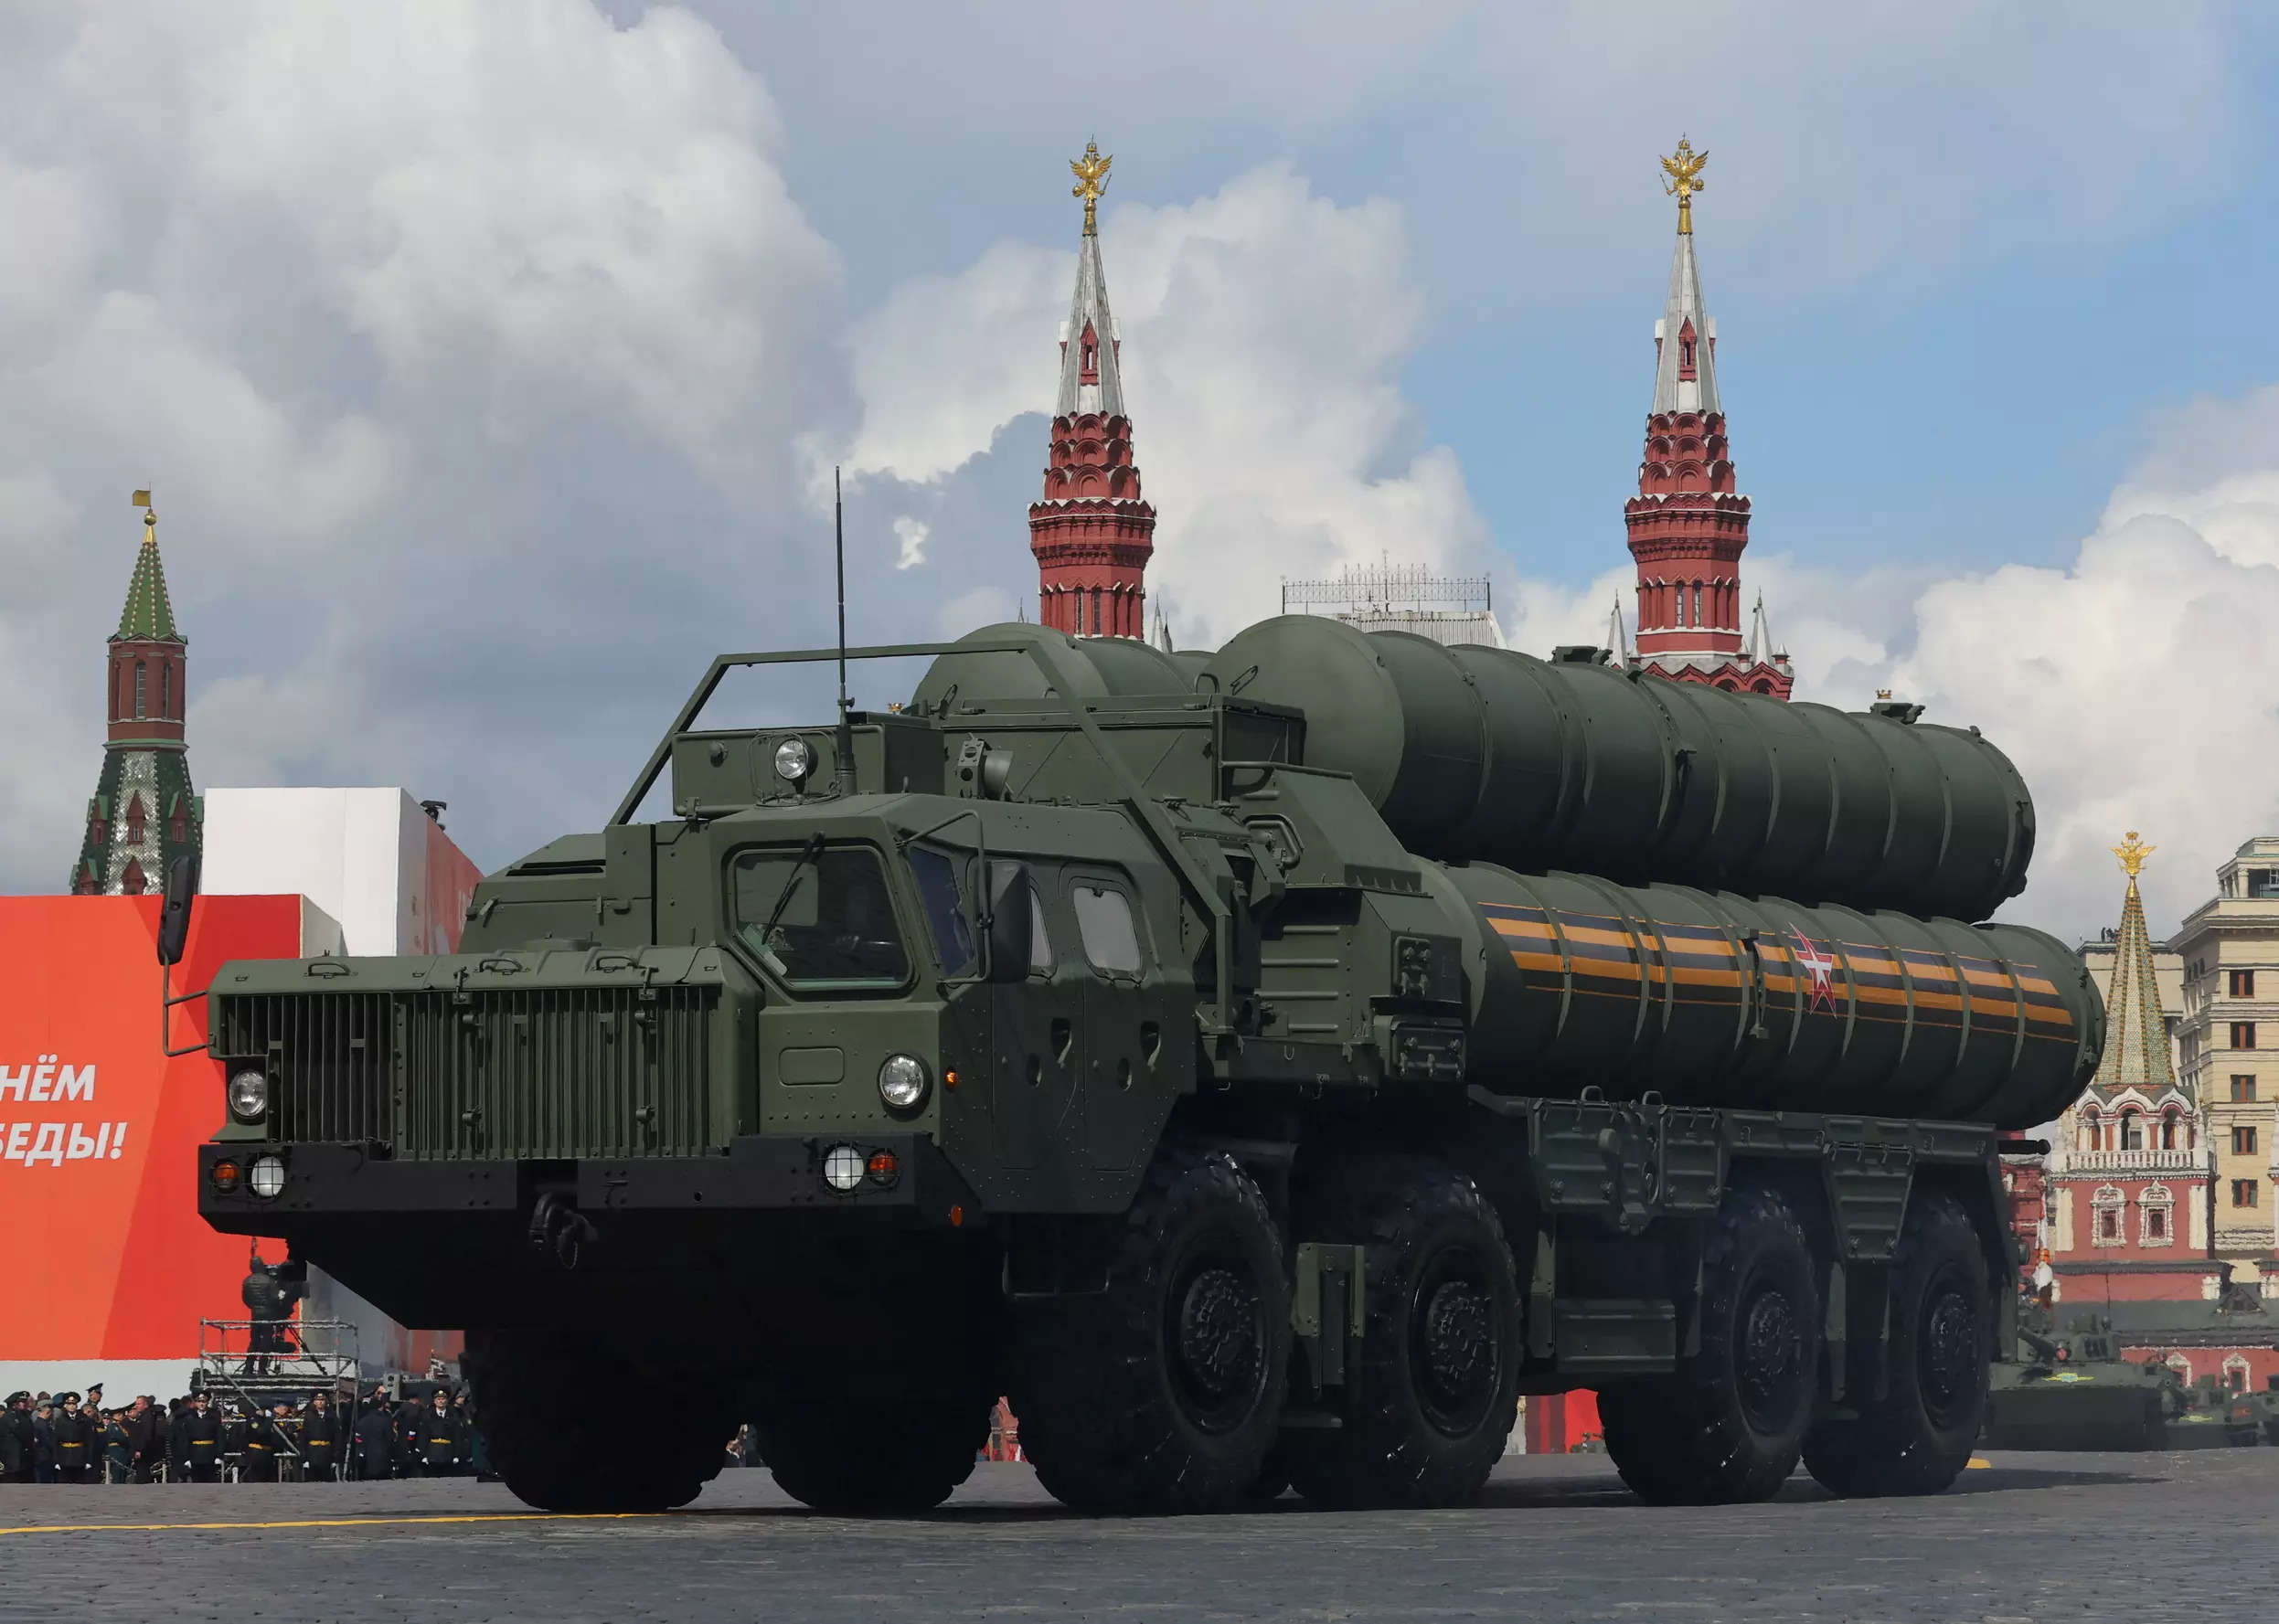 Times Top10: ‘India to deploy S-400 systems next month’